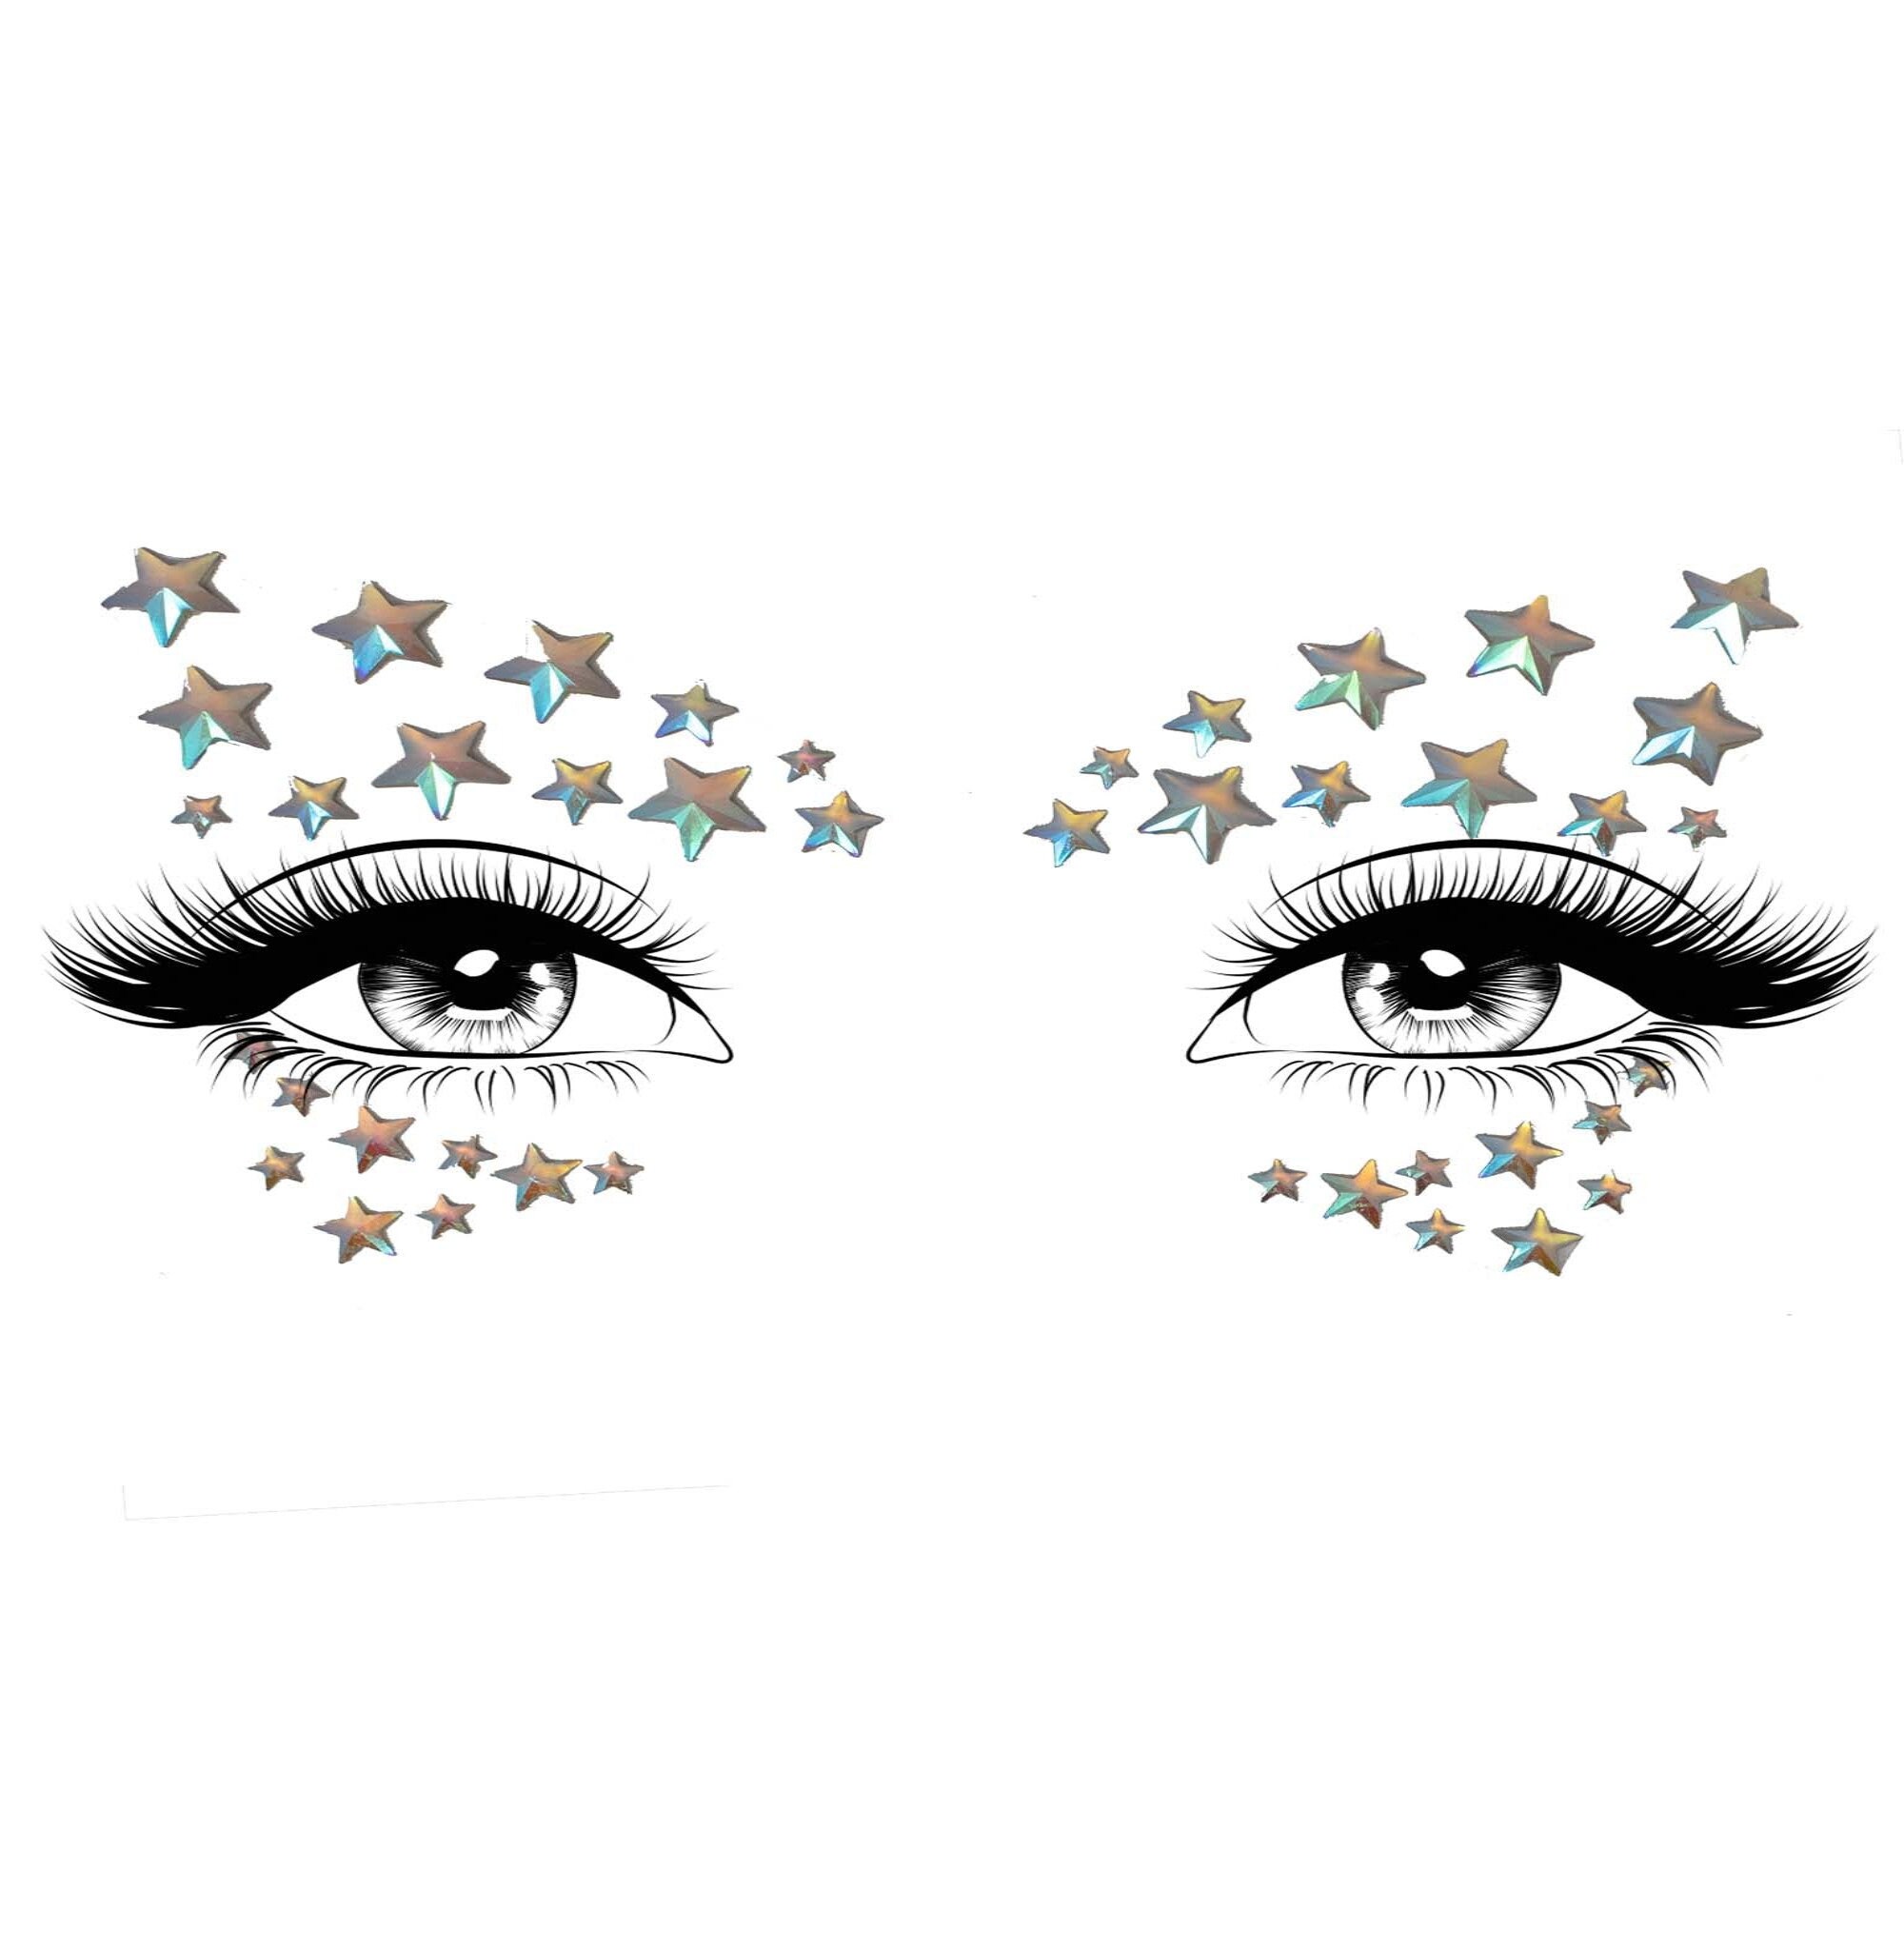 2pcs 3d Imitation Pearl & Rhinestone Eye & Face Stickers For Music  Festivals, Diy Makeup Party Decoration Black Friday